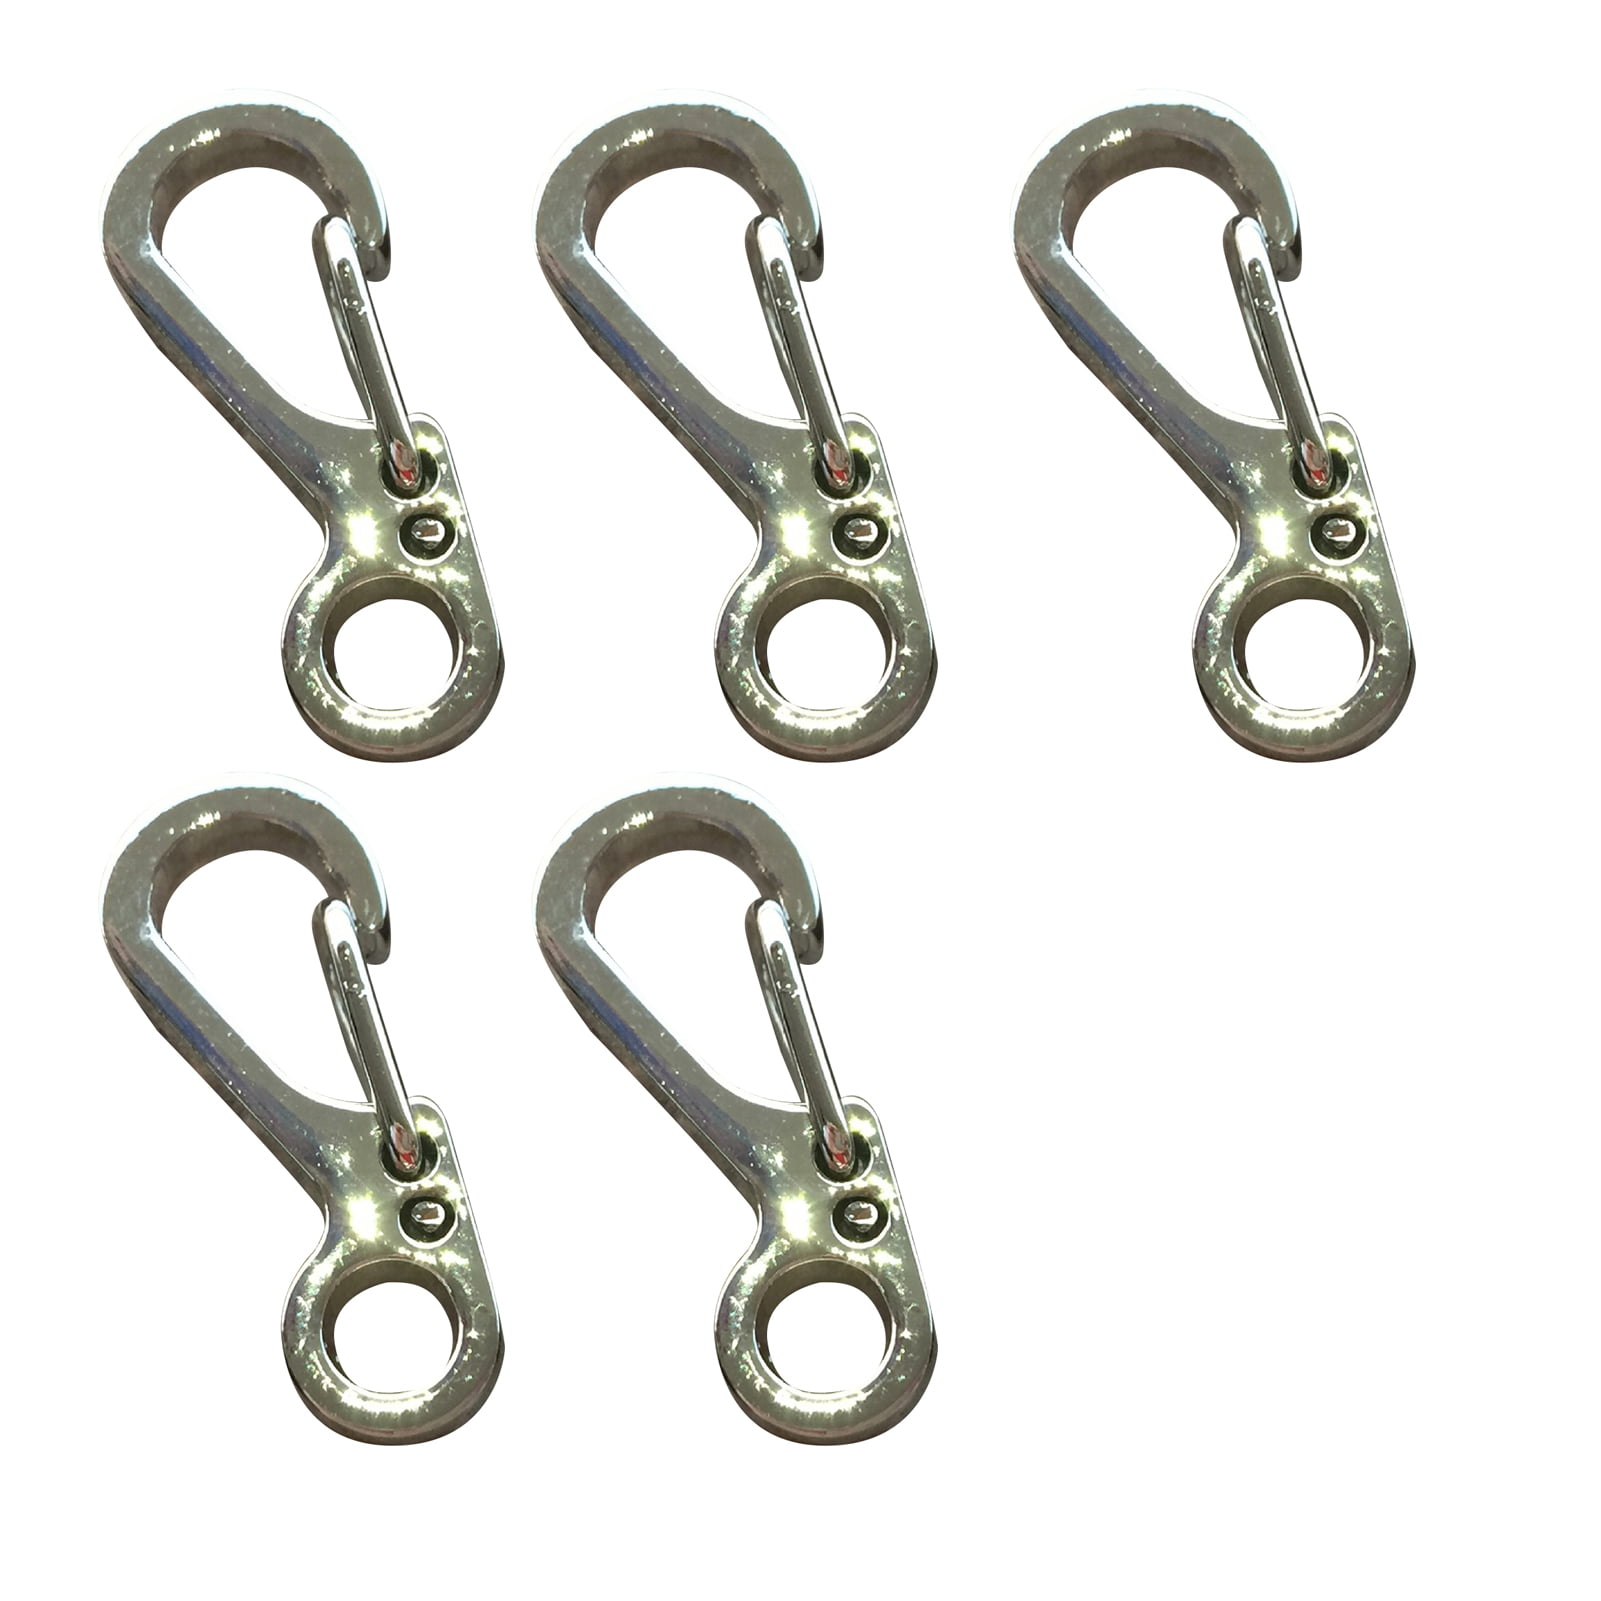 Prettyia 20pcs D Shape Carabiners Buckle Snap Spring Clip Hook Keychain Tool 